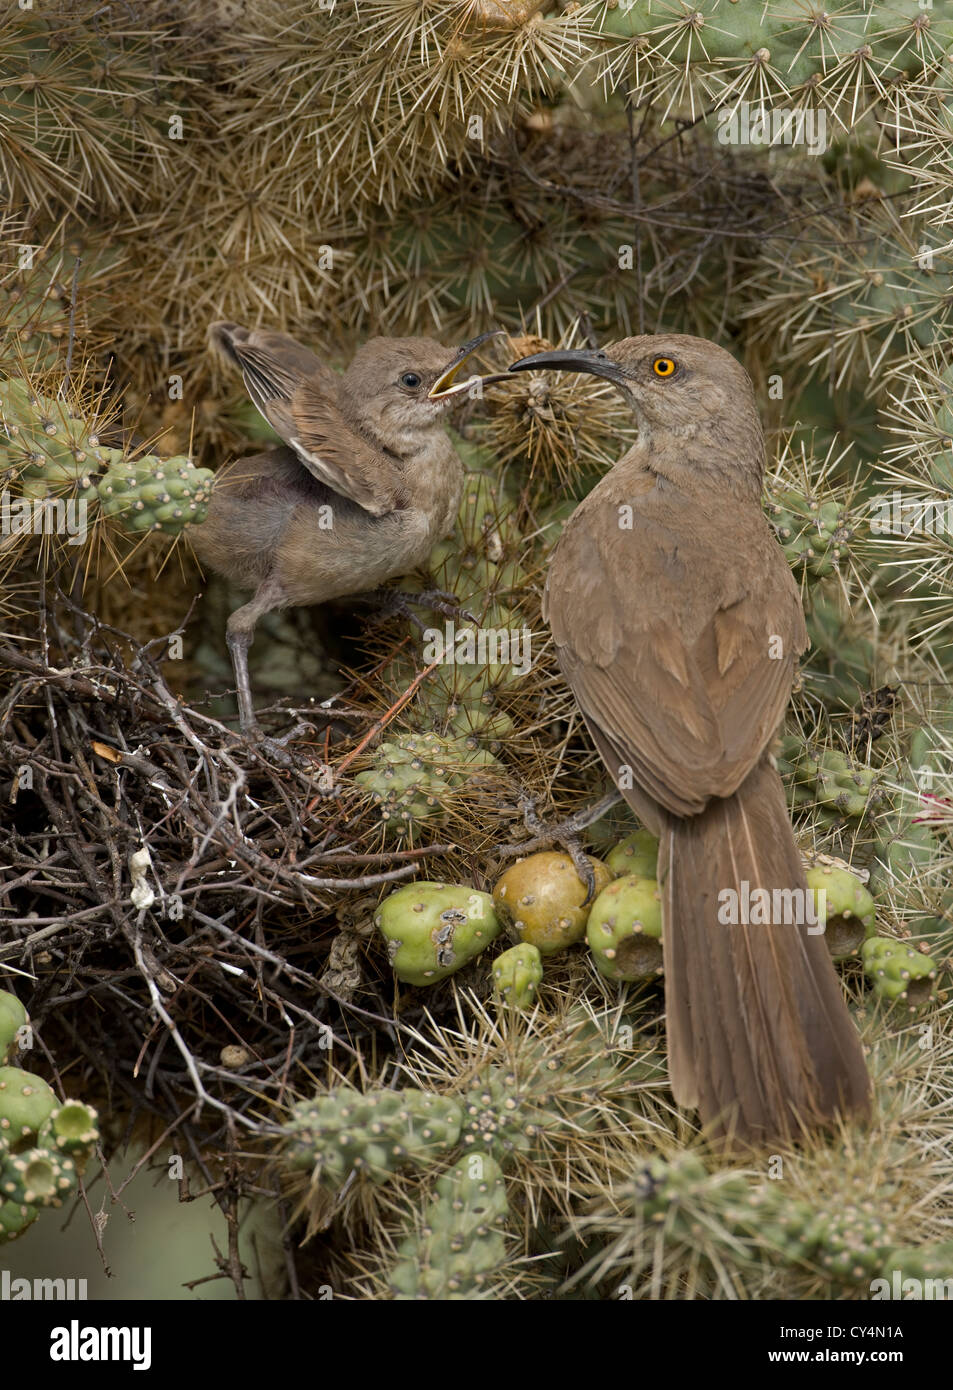 Curve-billed Thrashers (Toxostoma curvirostre) - Adult feeding young on nest in cholla cactus - Arizona - USA Stock Photo